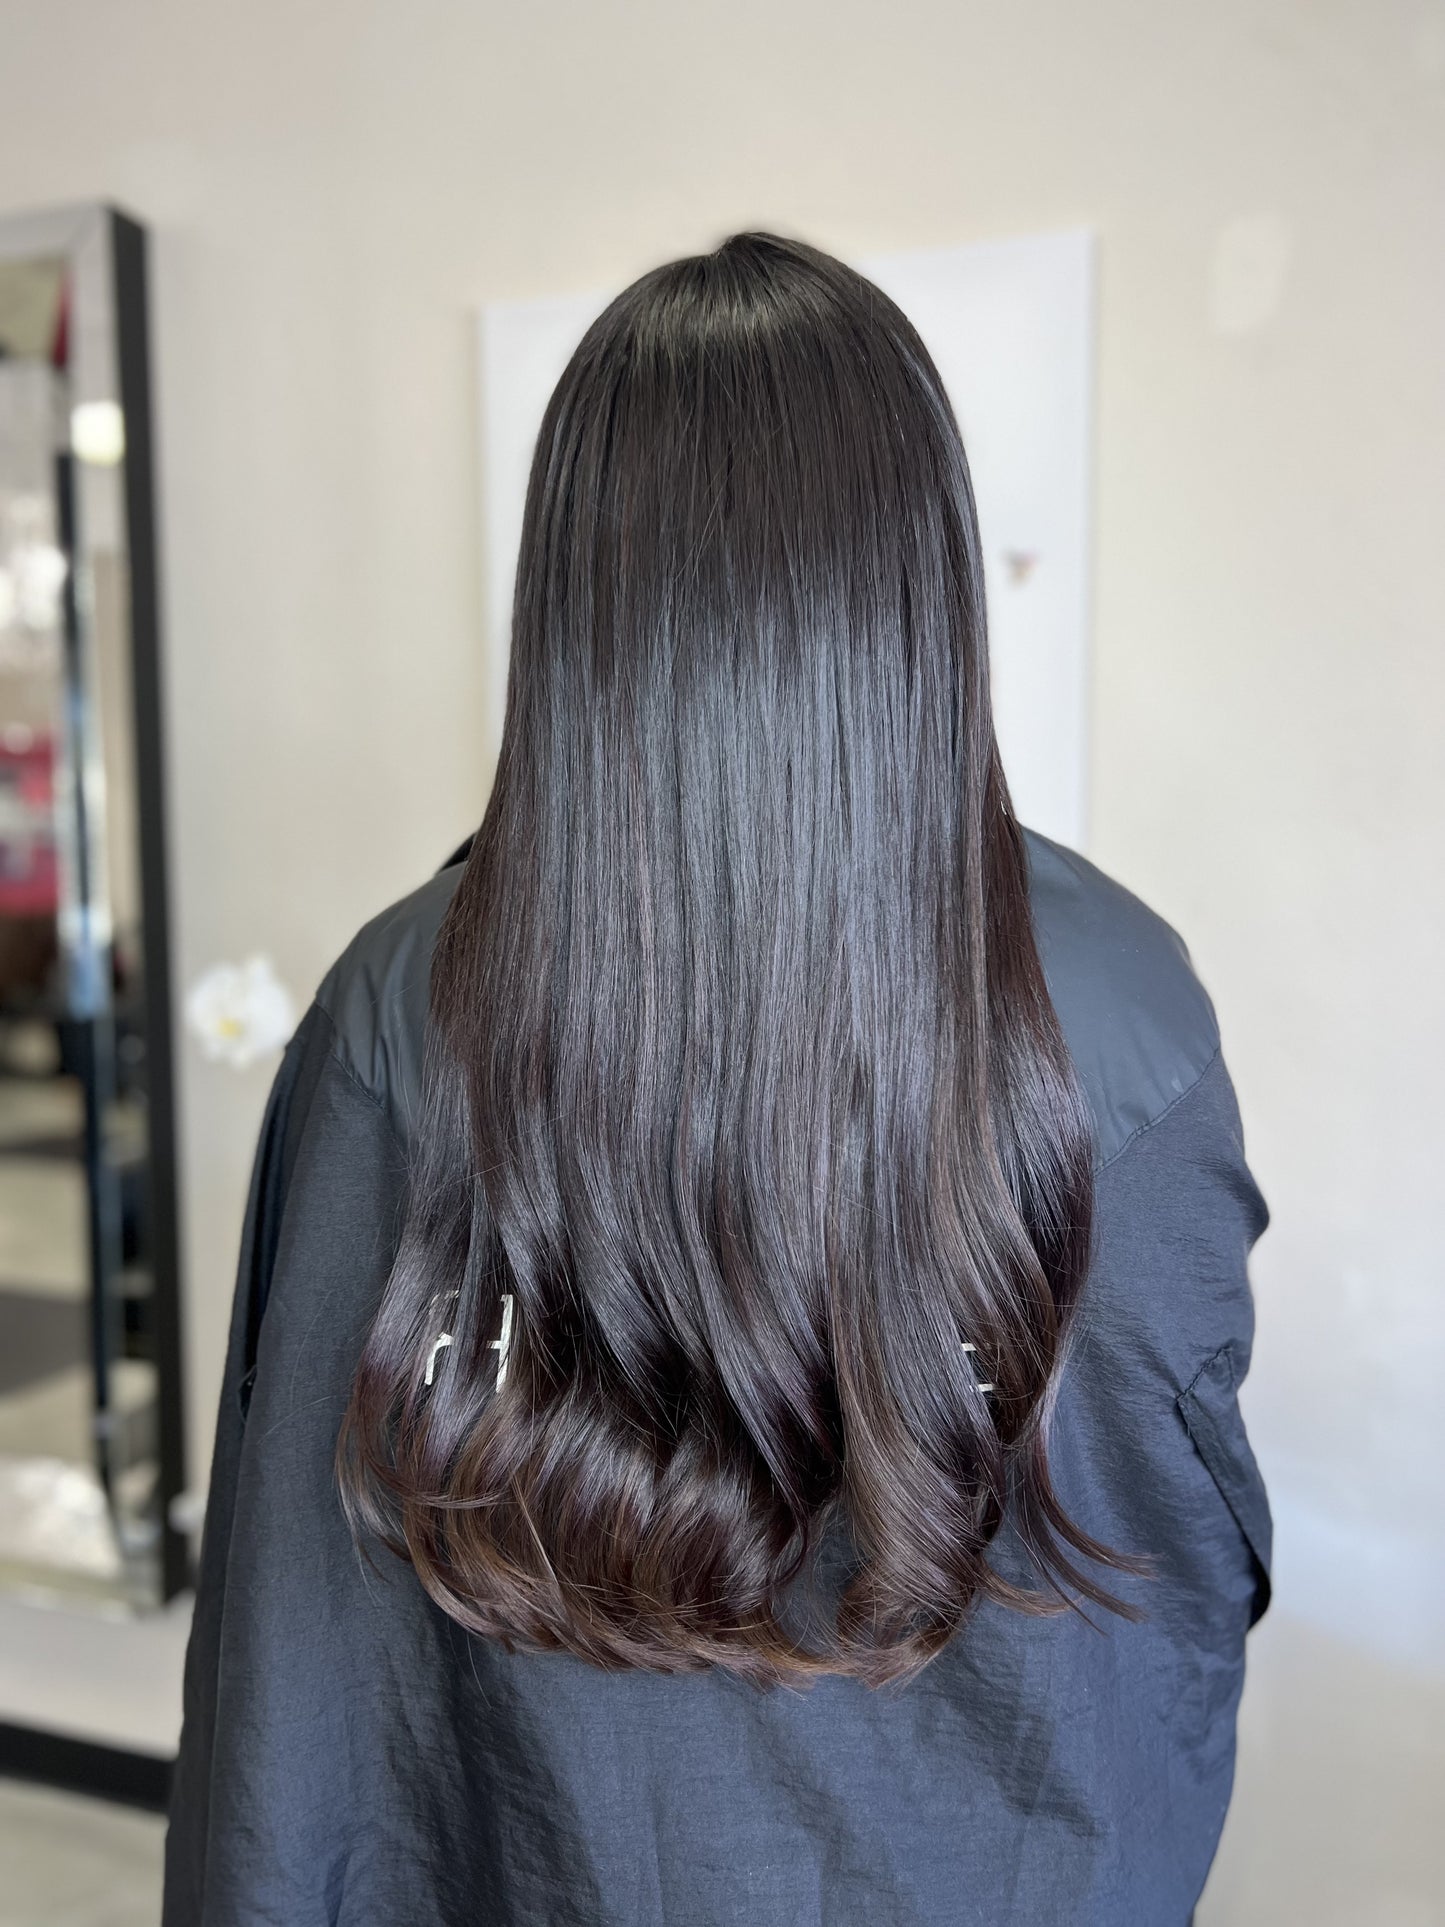 Tape-in Hair Extensions Application